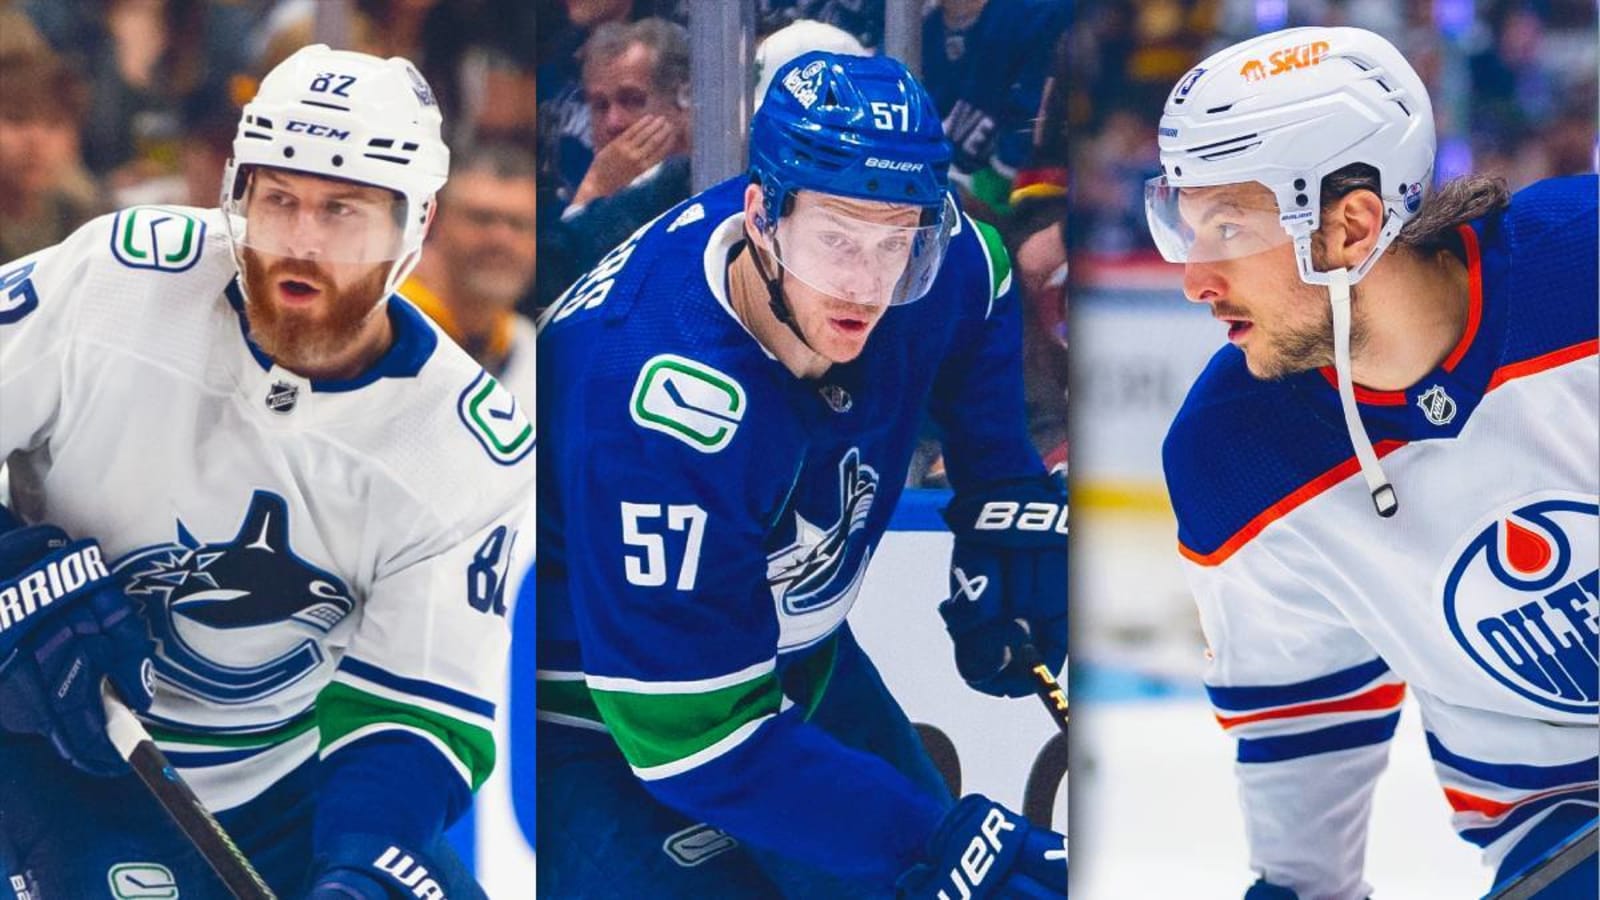 NHL bets: This +937 SGP reflects a tight defensive battle in Oilers-Canucks Game 7